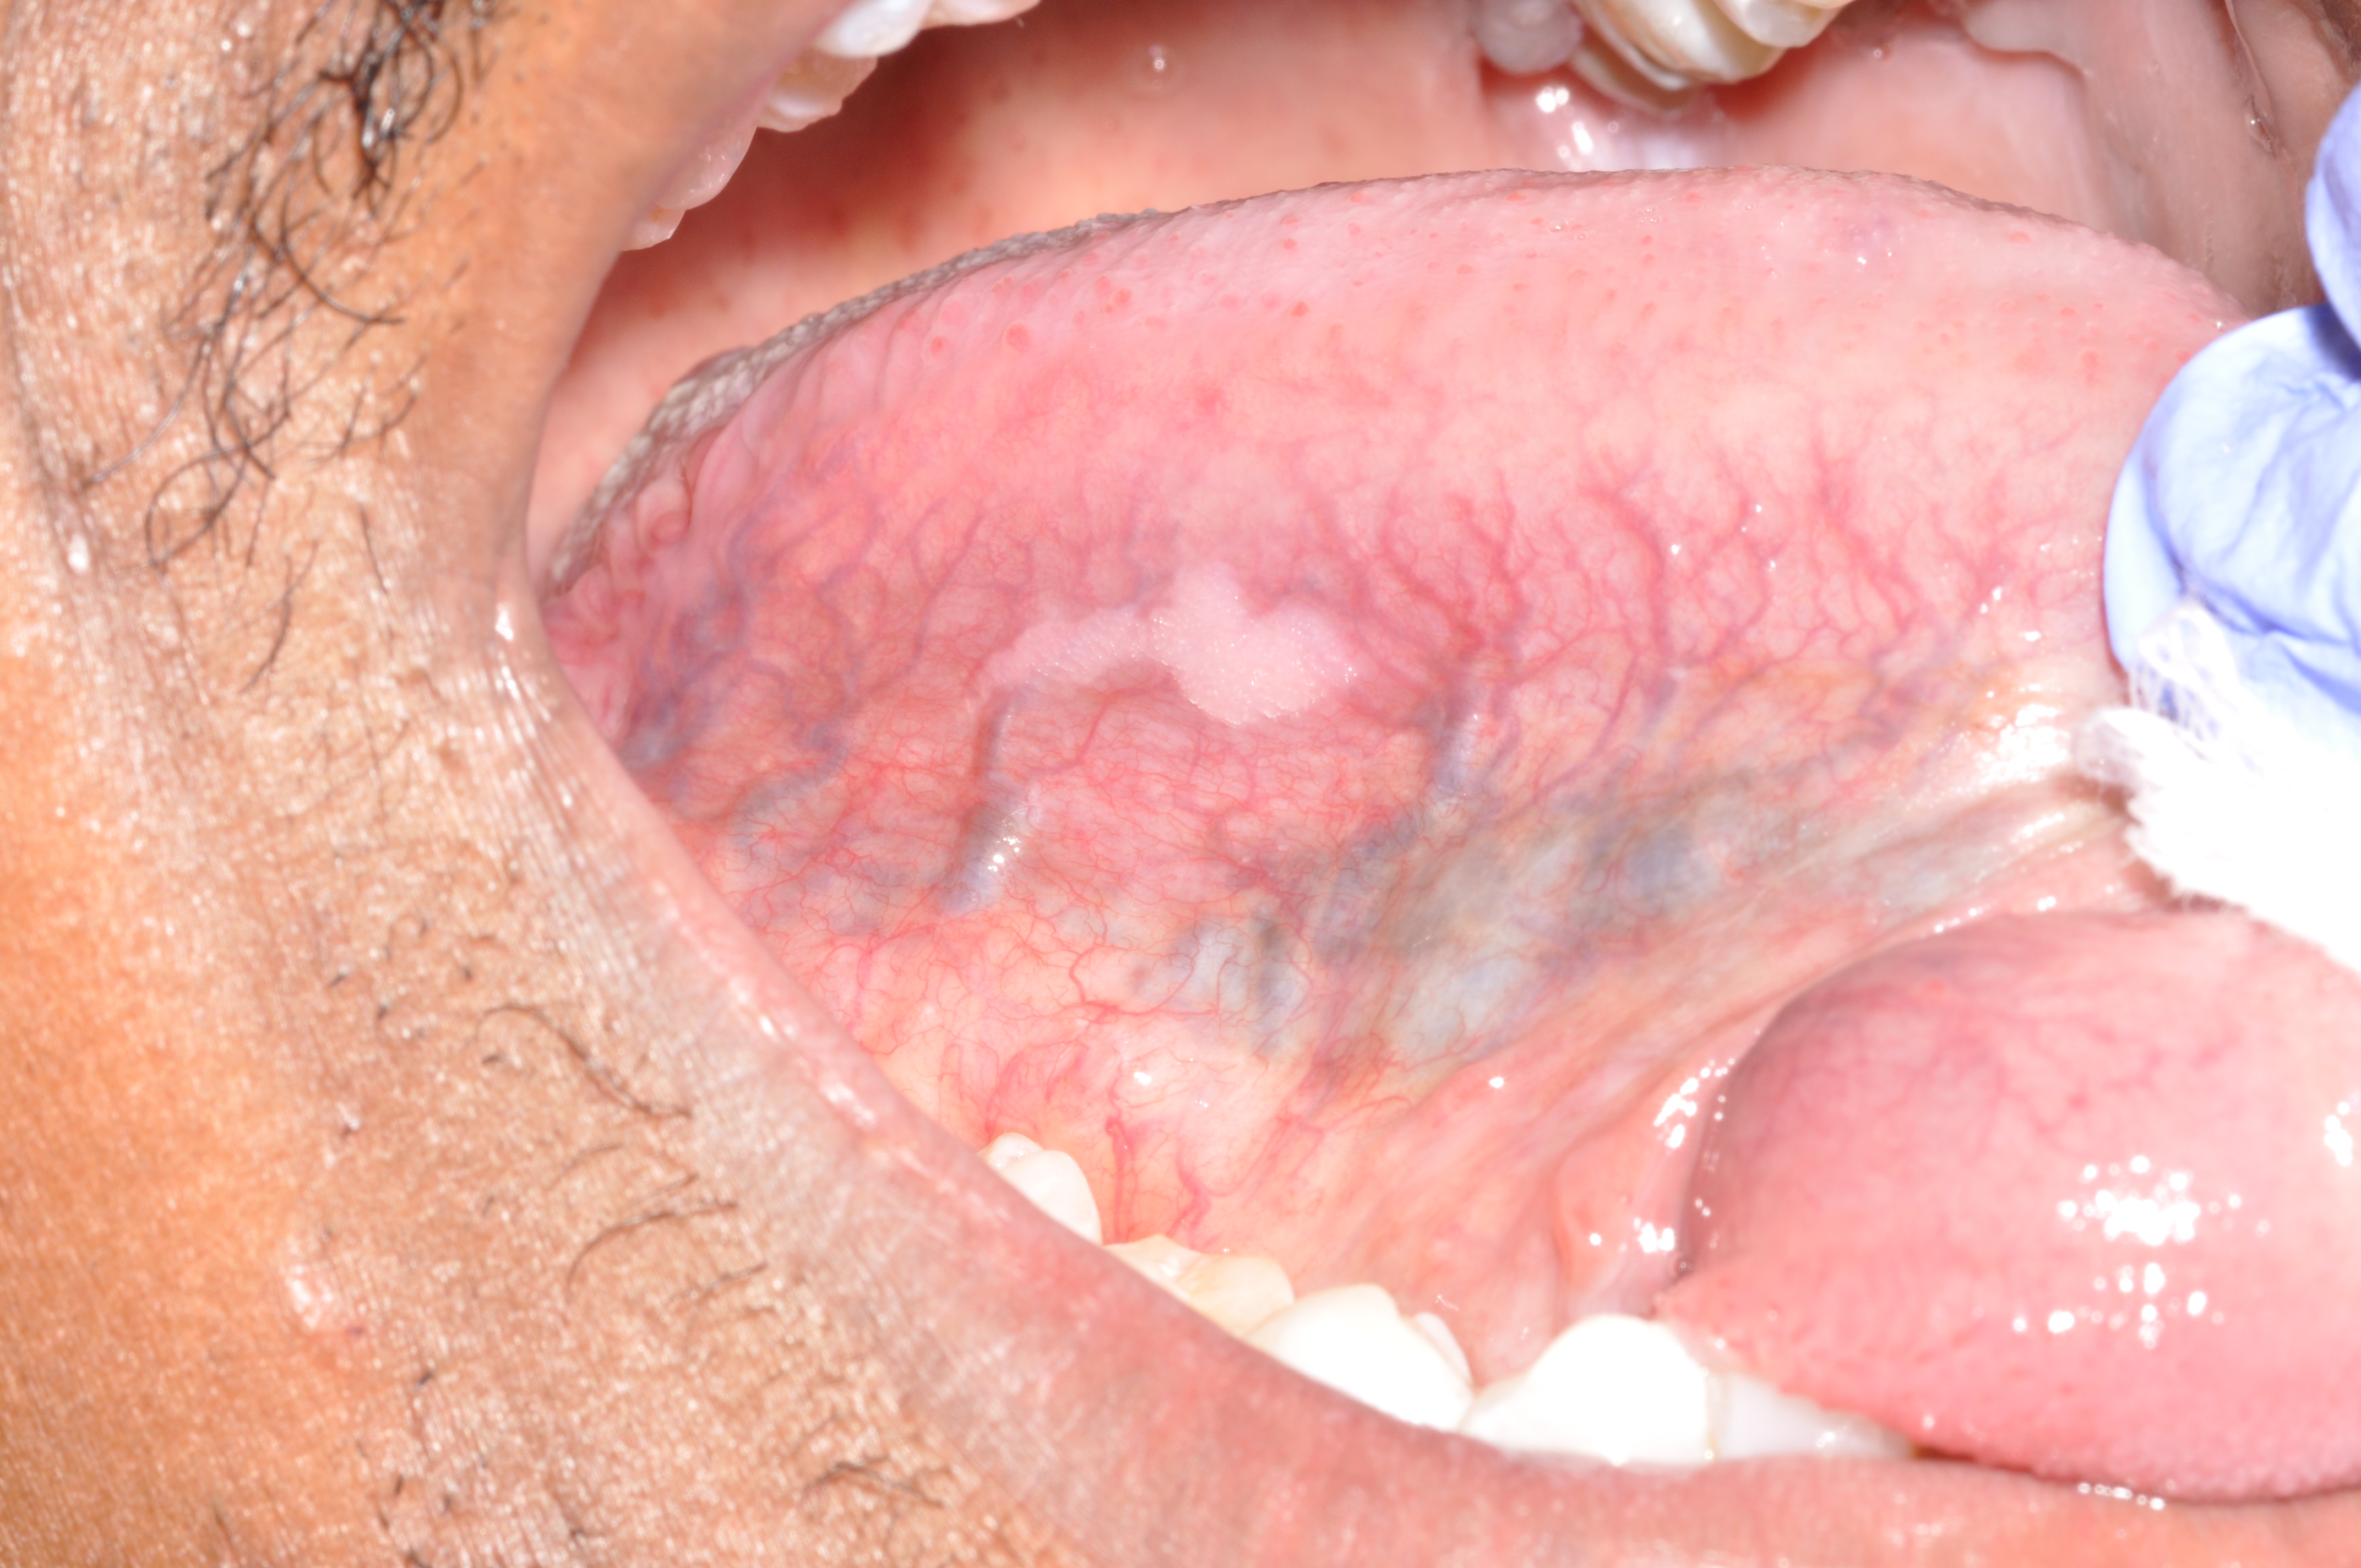 Sores on the tongue indicating early signs of oral cancer.